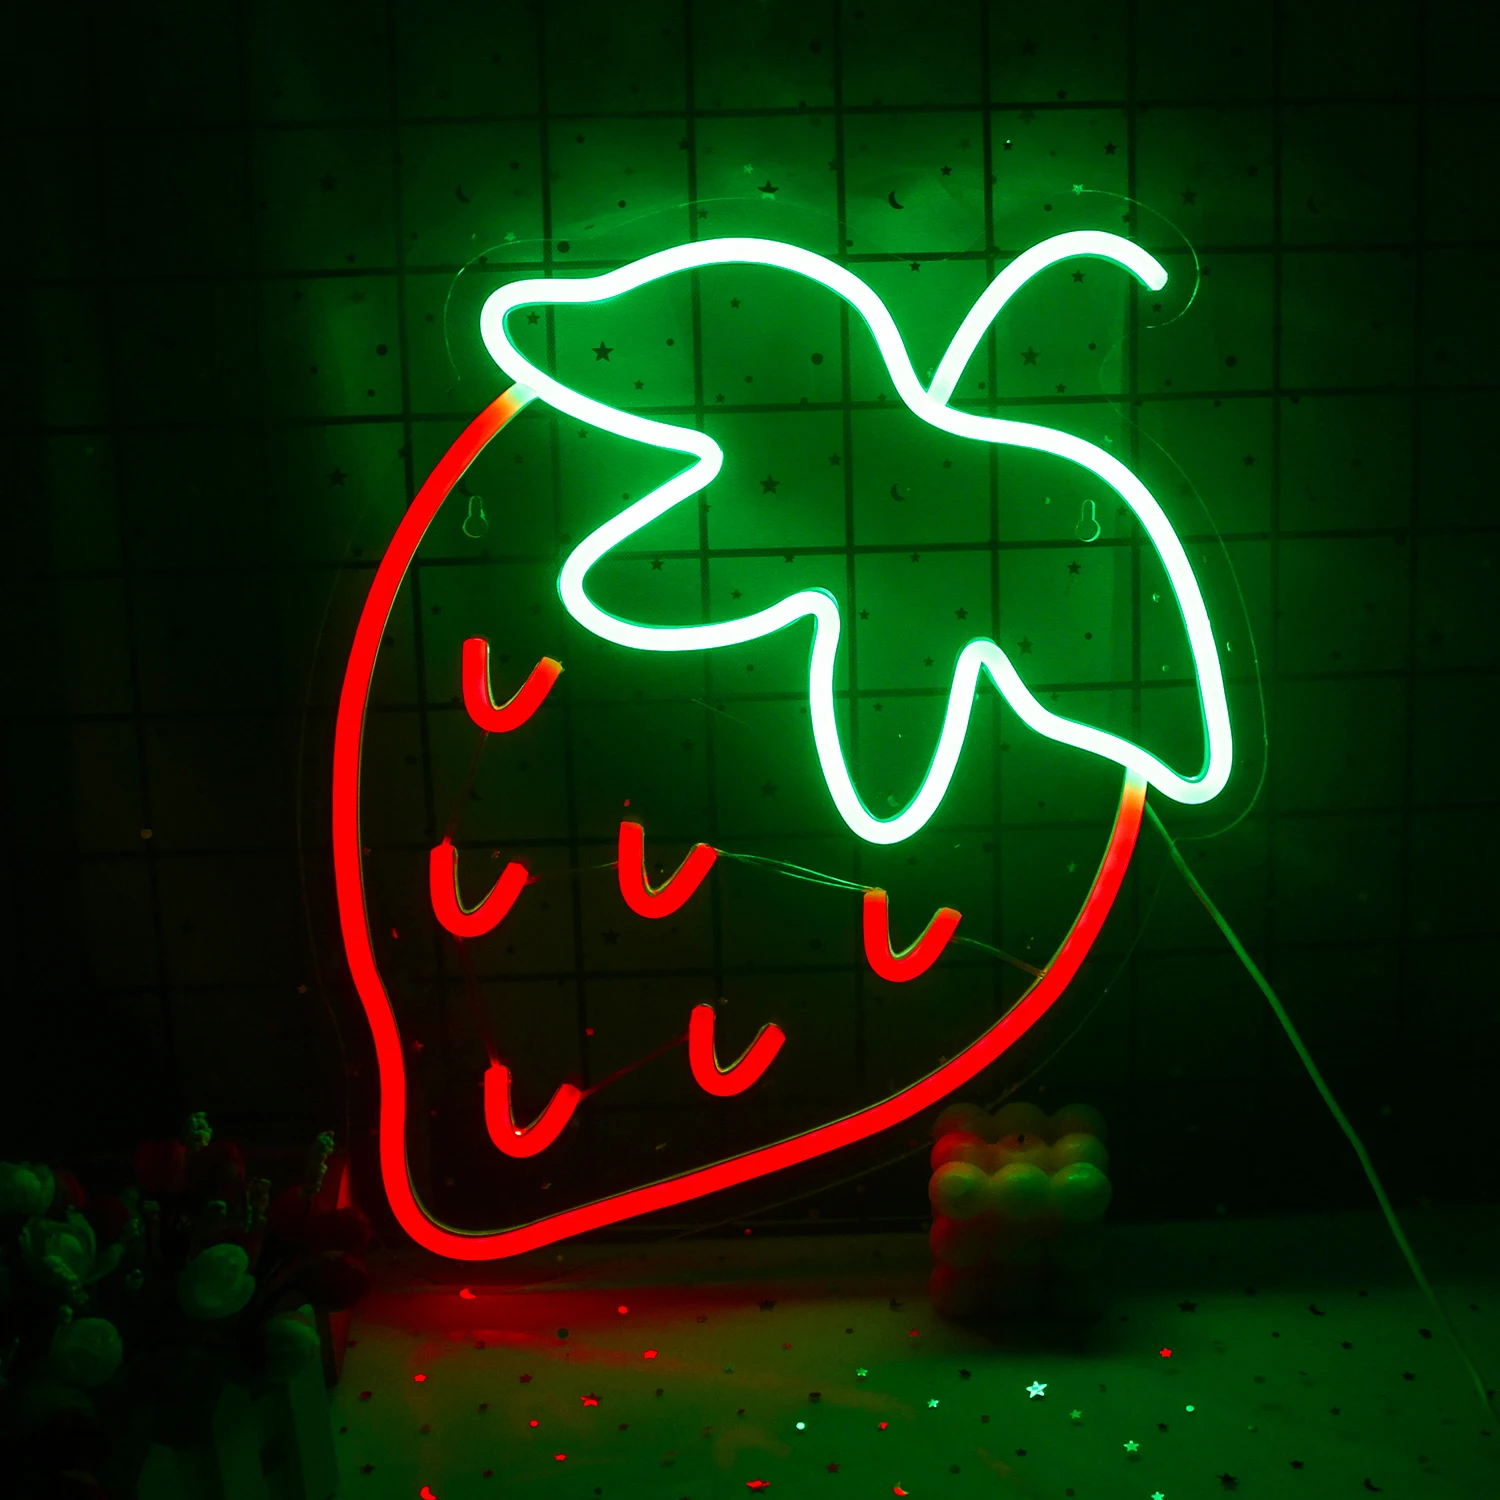 Ineonlife Neon Sign LED Strawberry Wall Mounted Acrylic Bar Club Drink Restaurant Shop Party Aesthetics Room Home Decor Gifts neon sign led cartoon sunglasses wall hanging neon light bar club drink restaurant shop party aesthetic room decor led light